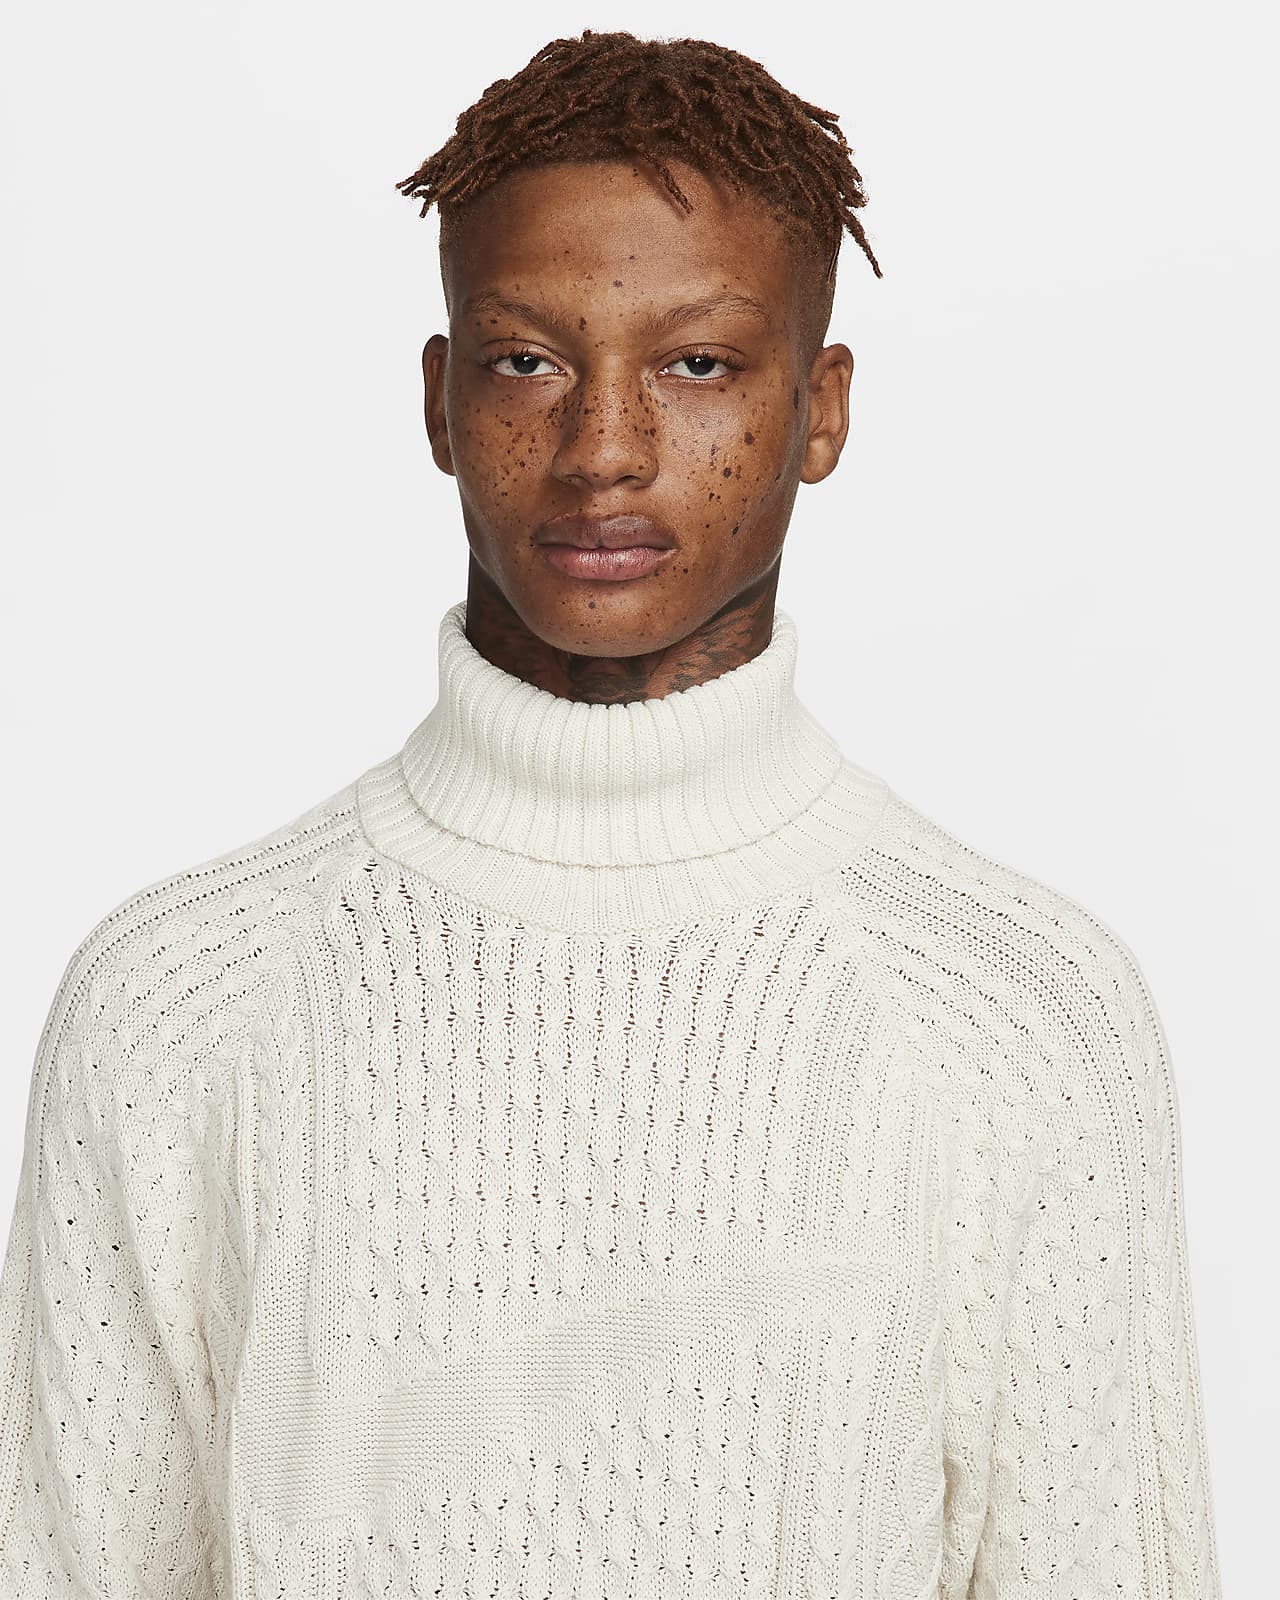 Nike Life Men's Cable Knit Turtleneck Sweater